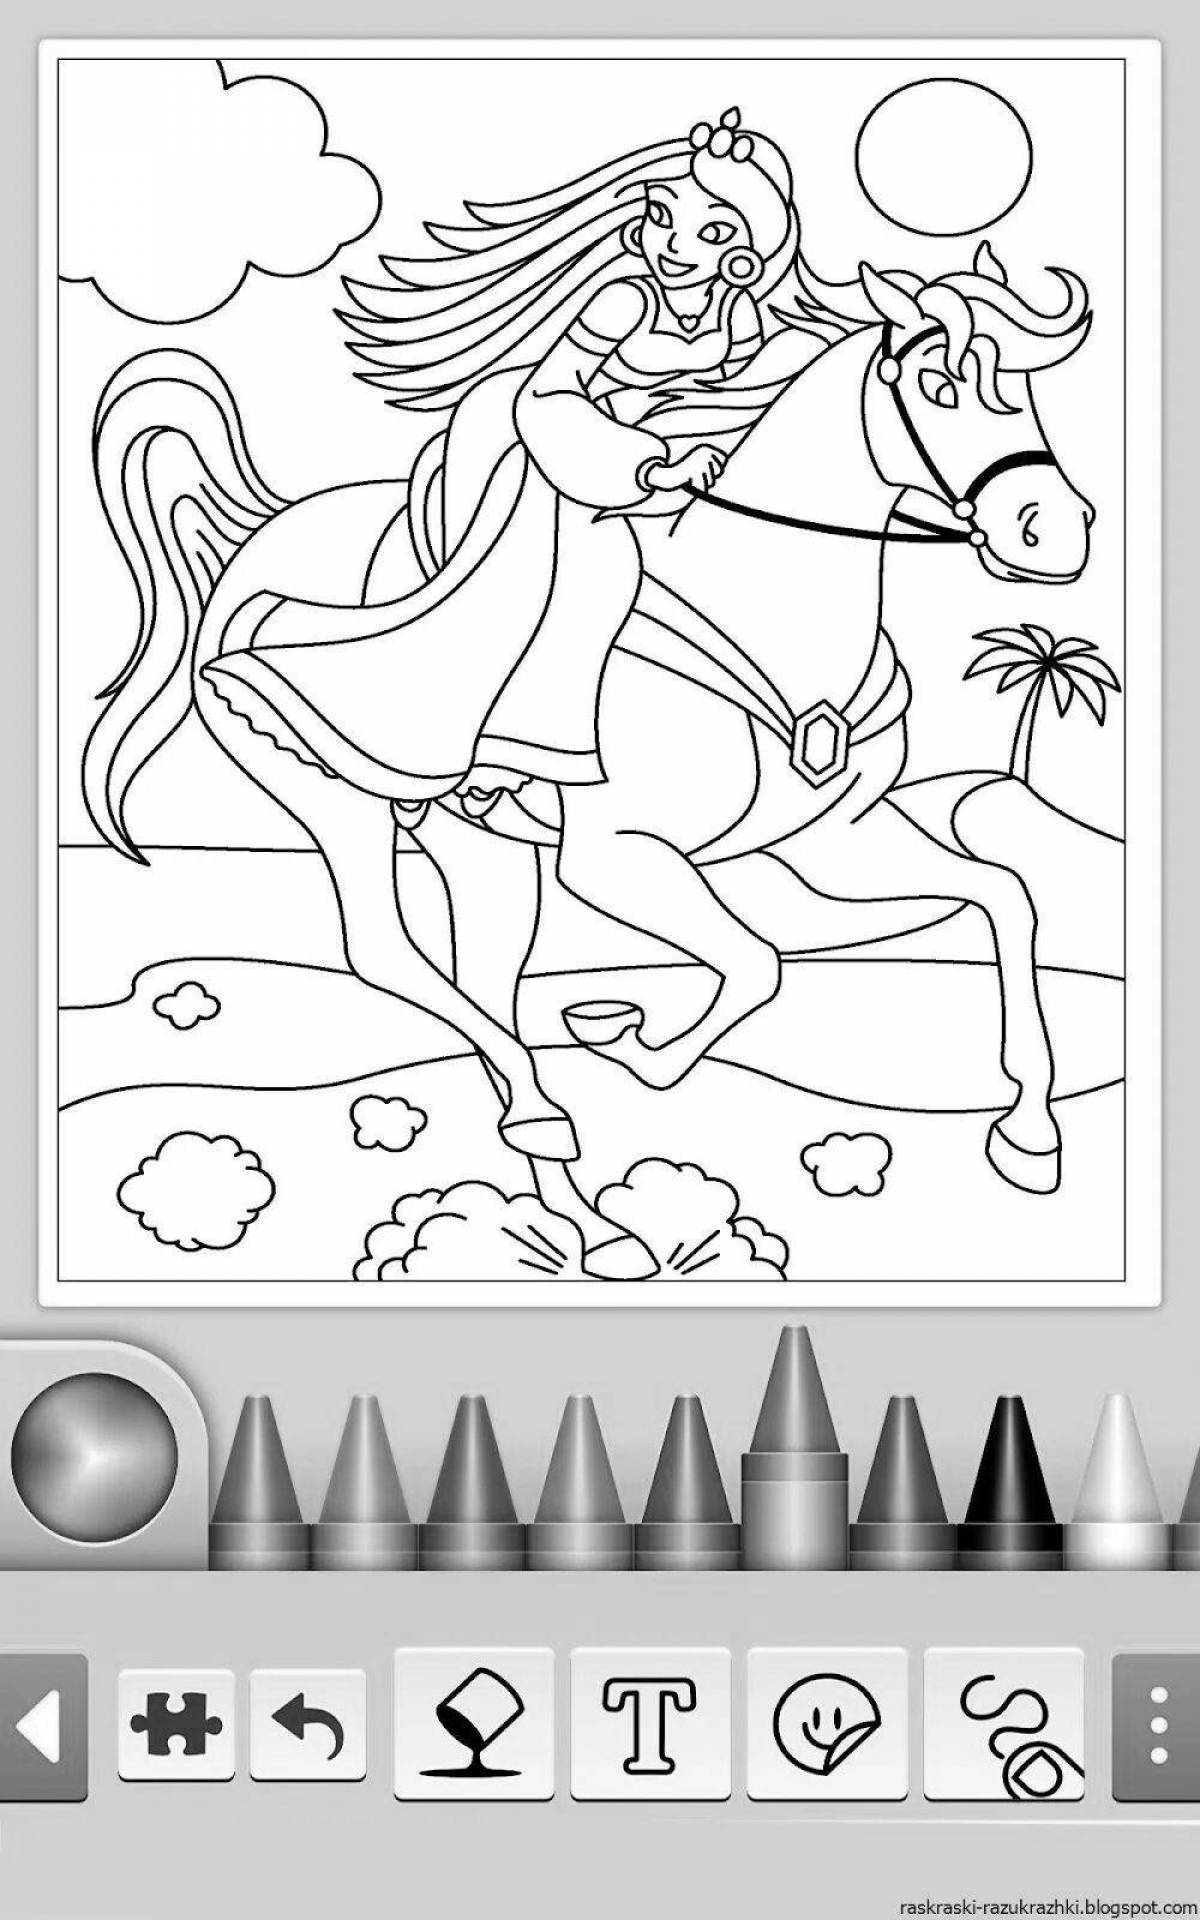 Coloring pages for 5 year old girls